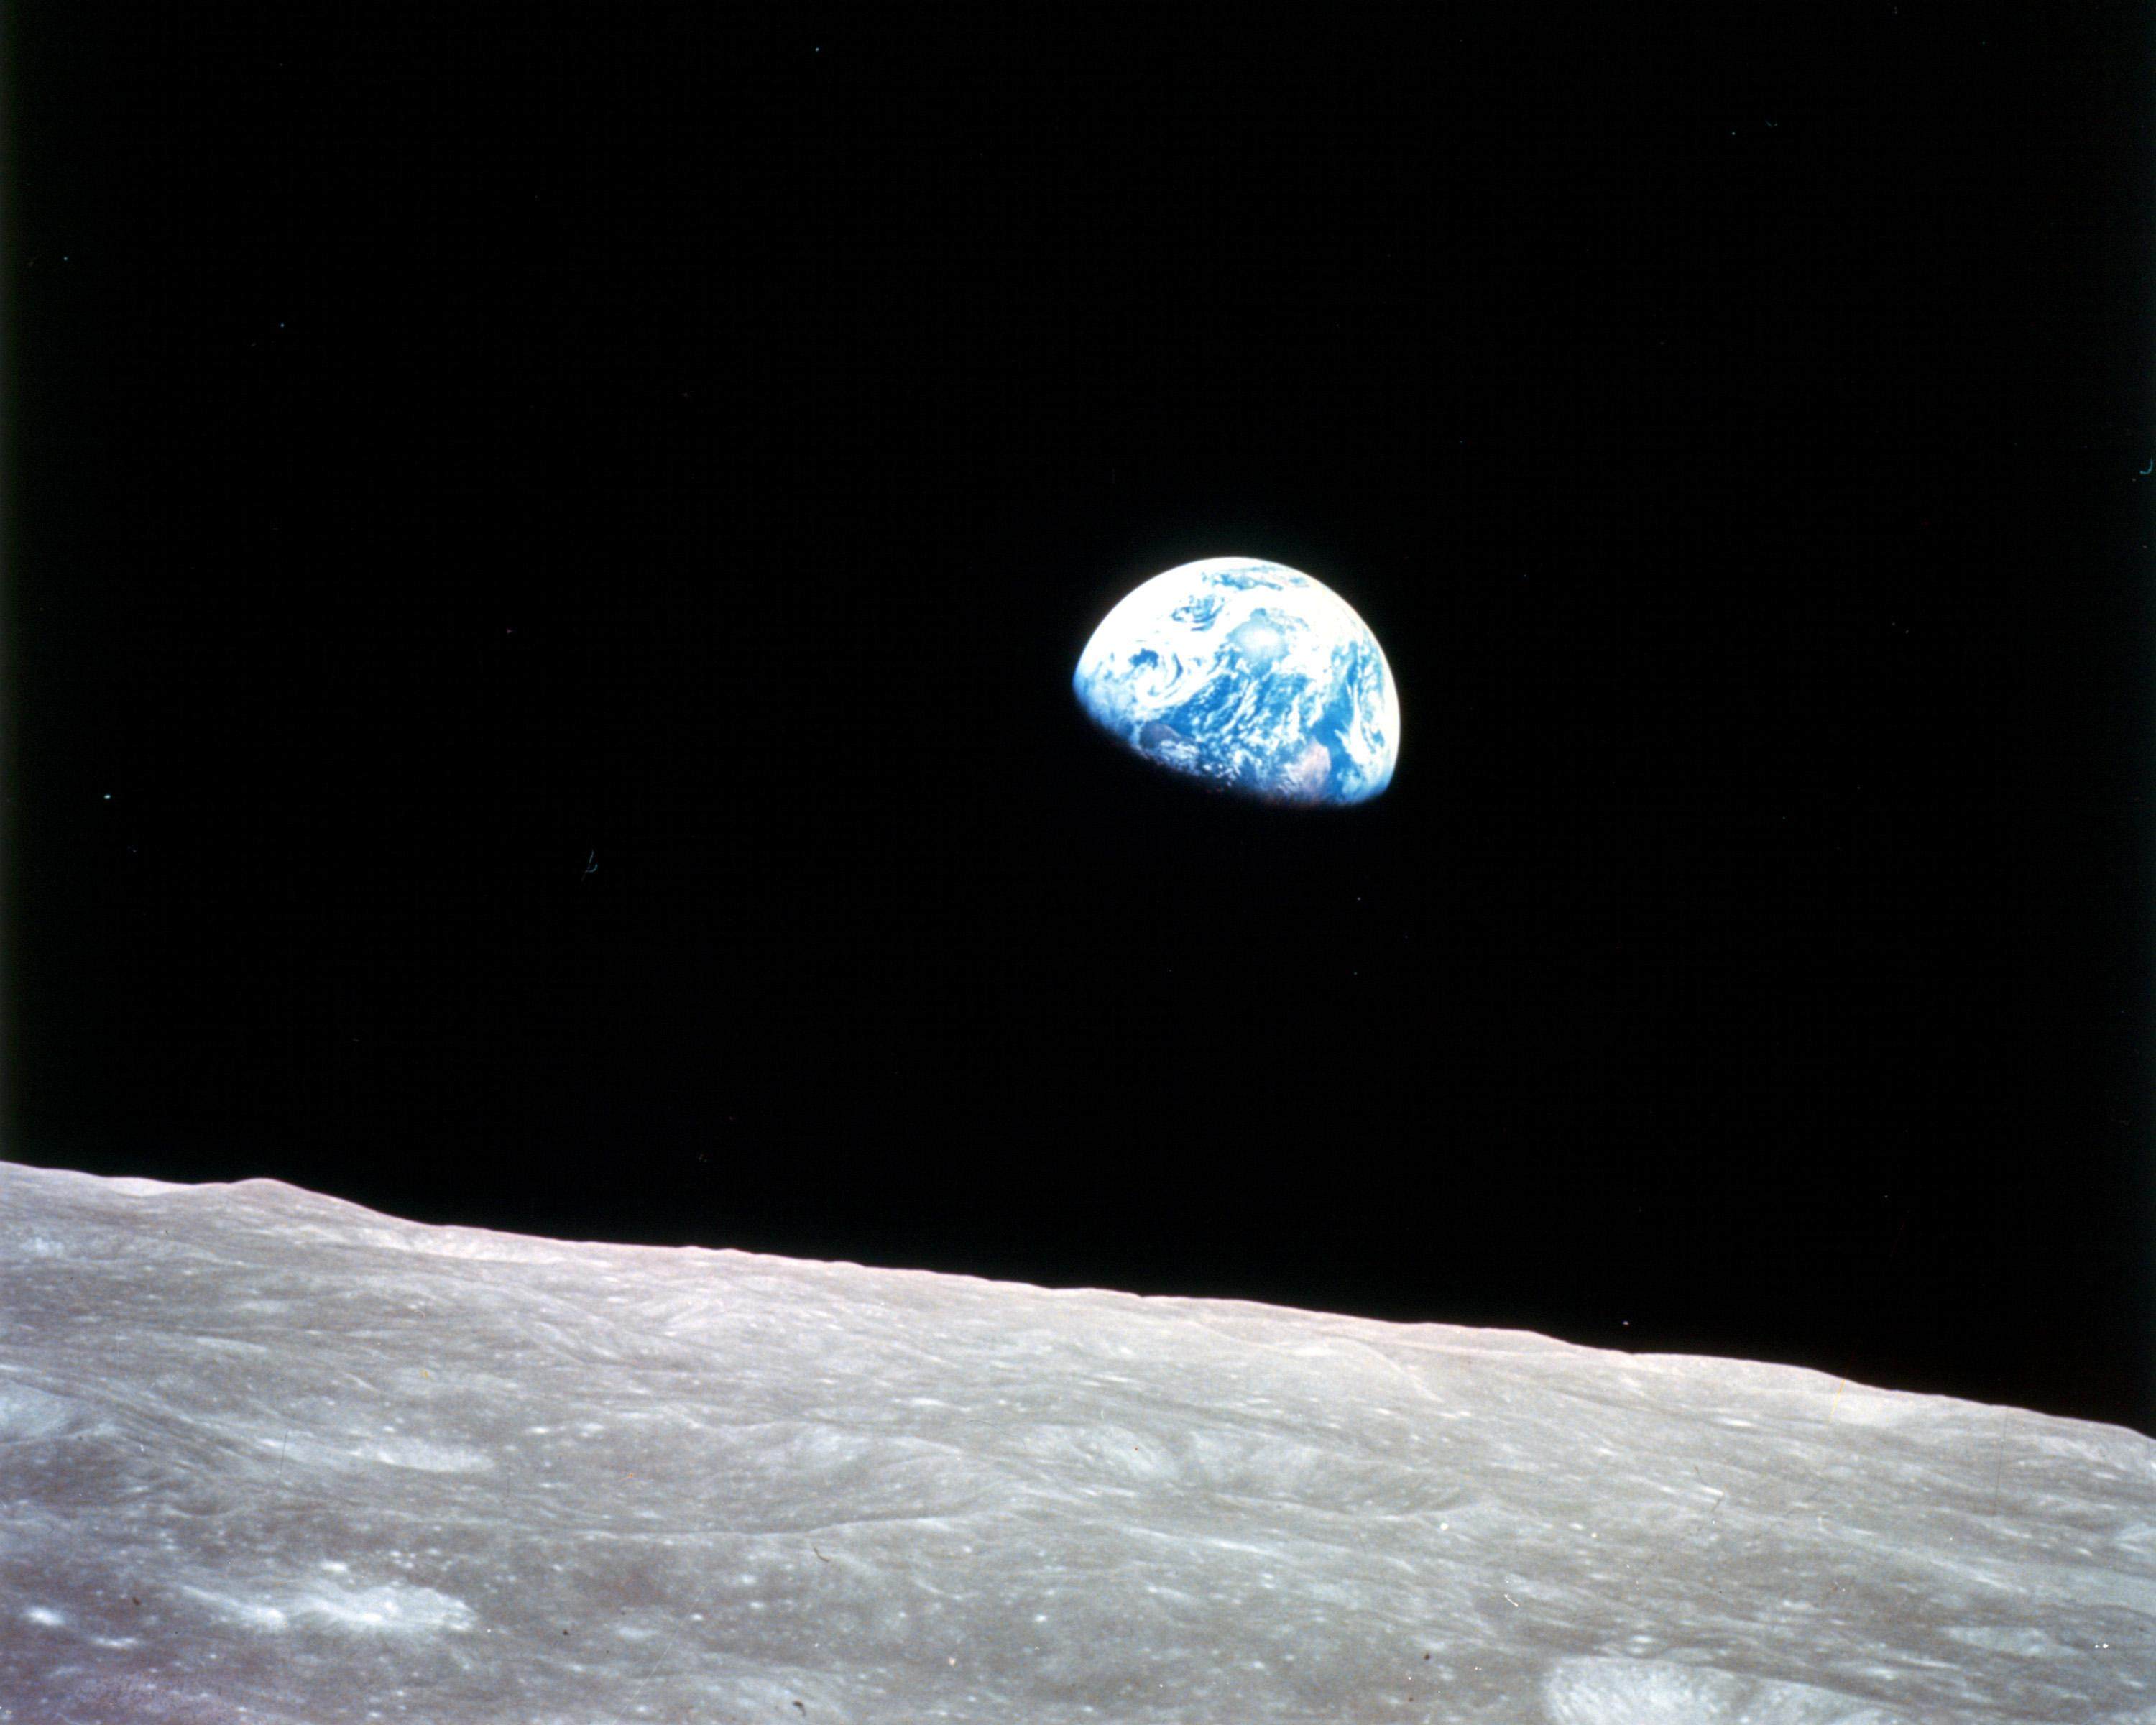 Earthrise over the moon. China aims to set up a lunar research base sooner than planned. Photo: AFP/Nasa